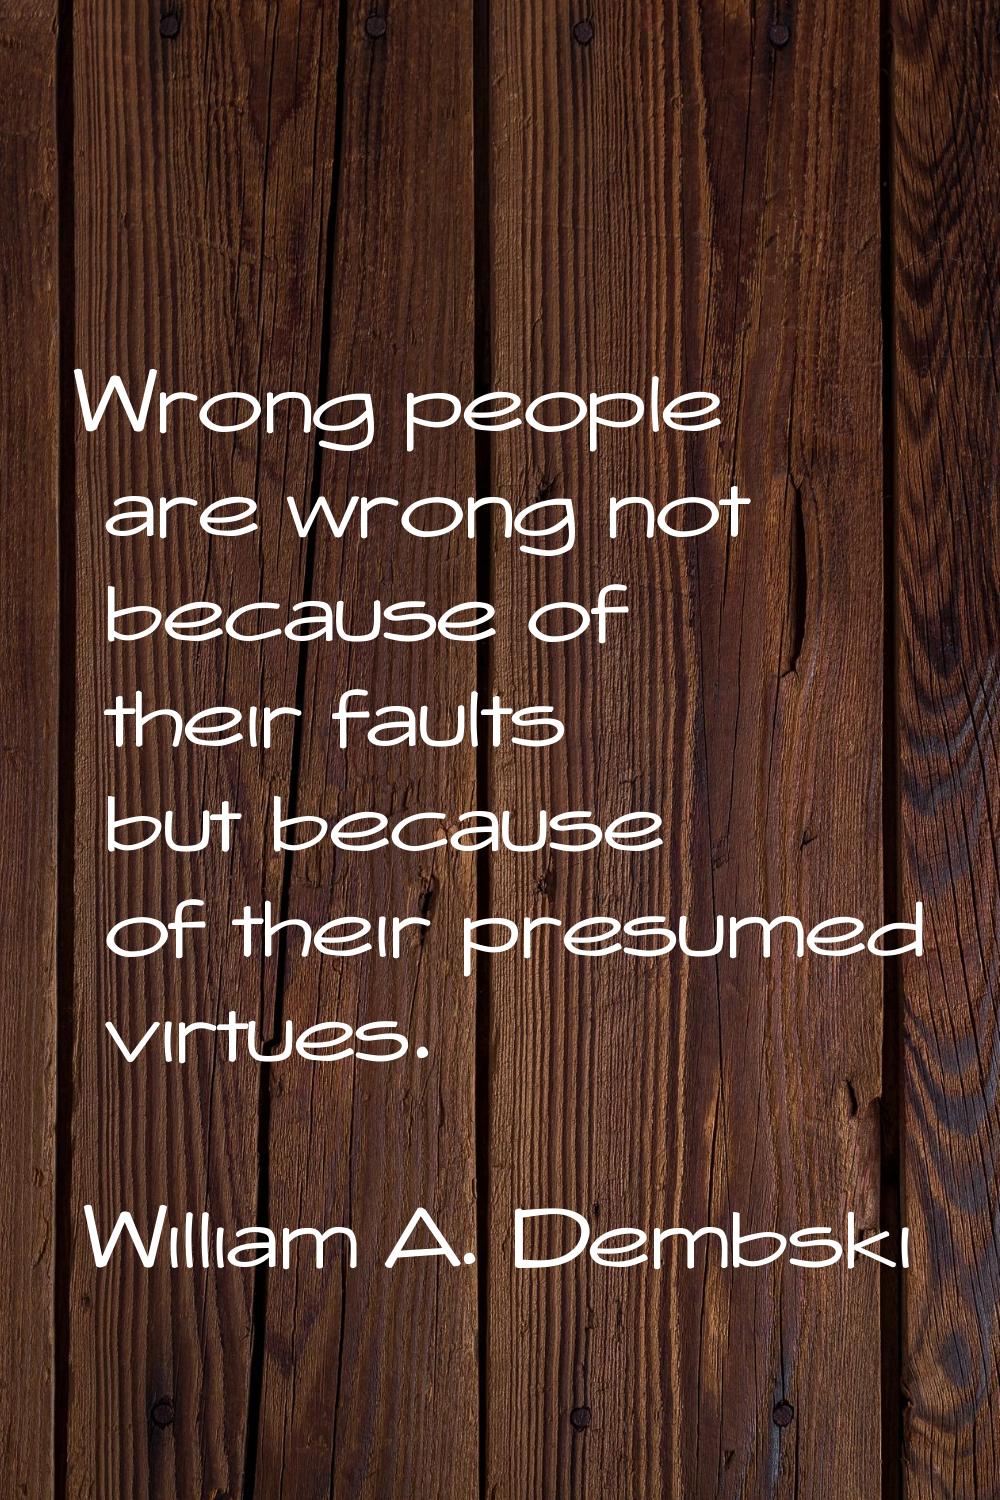 Wrong people are wrong not because of their faults but because of their presumed virtues.